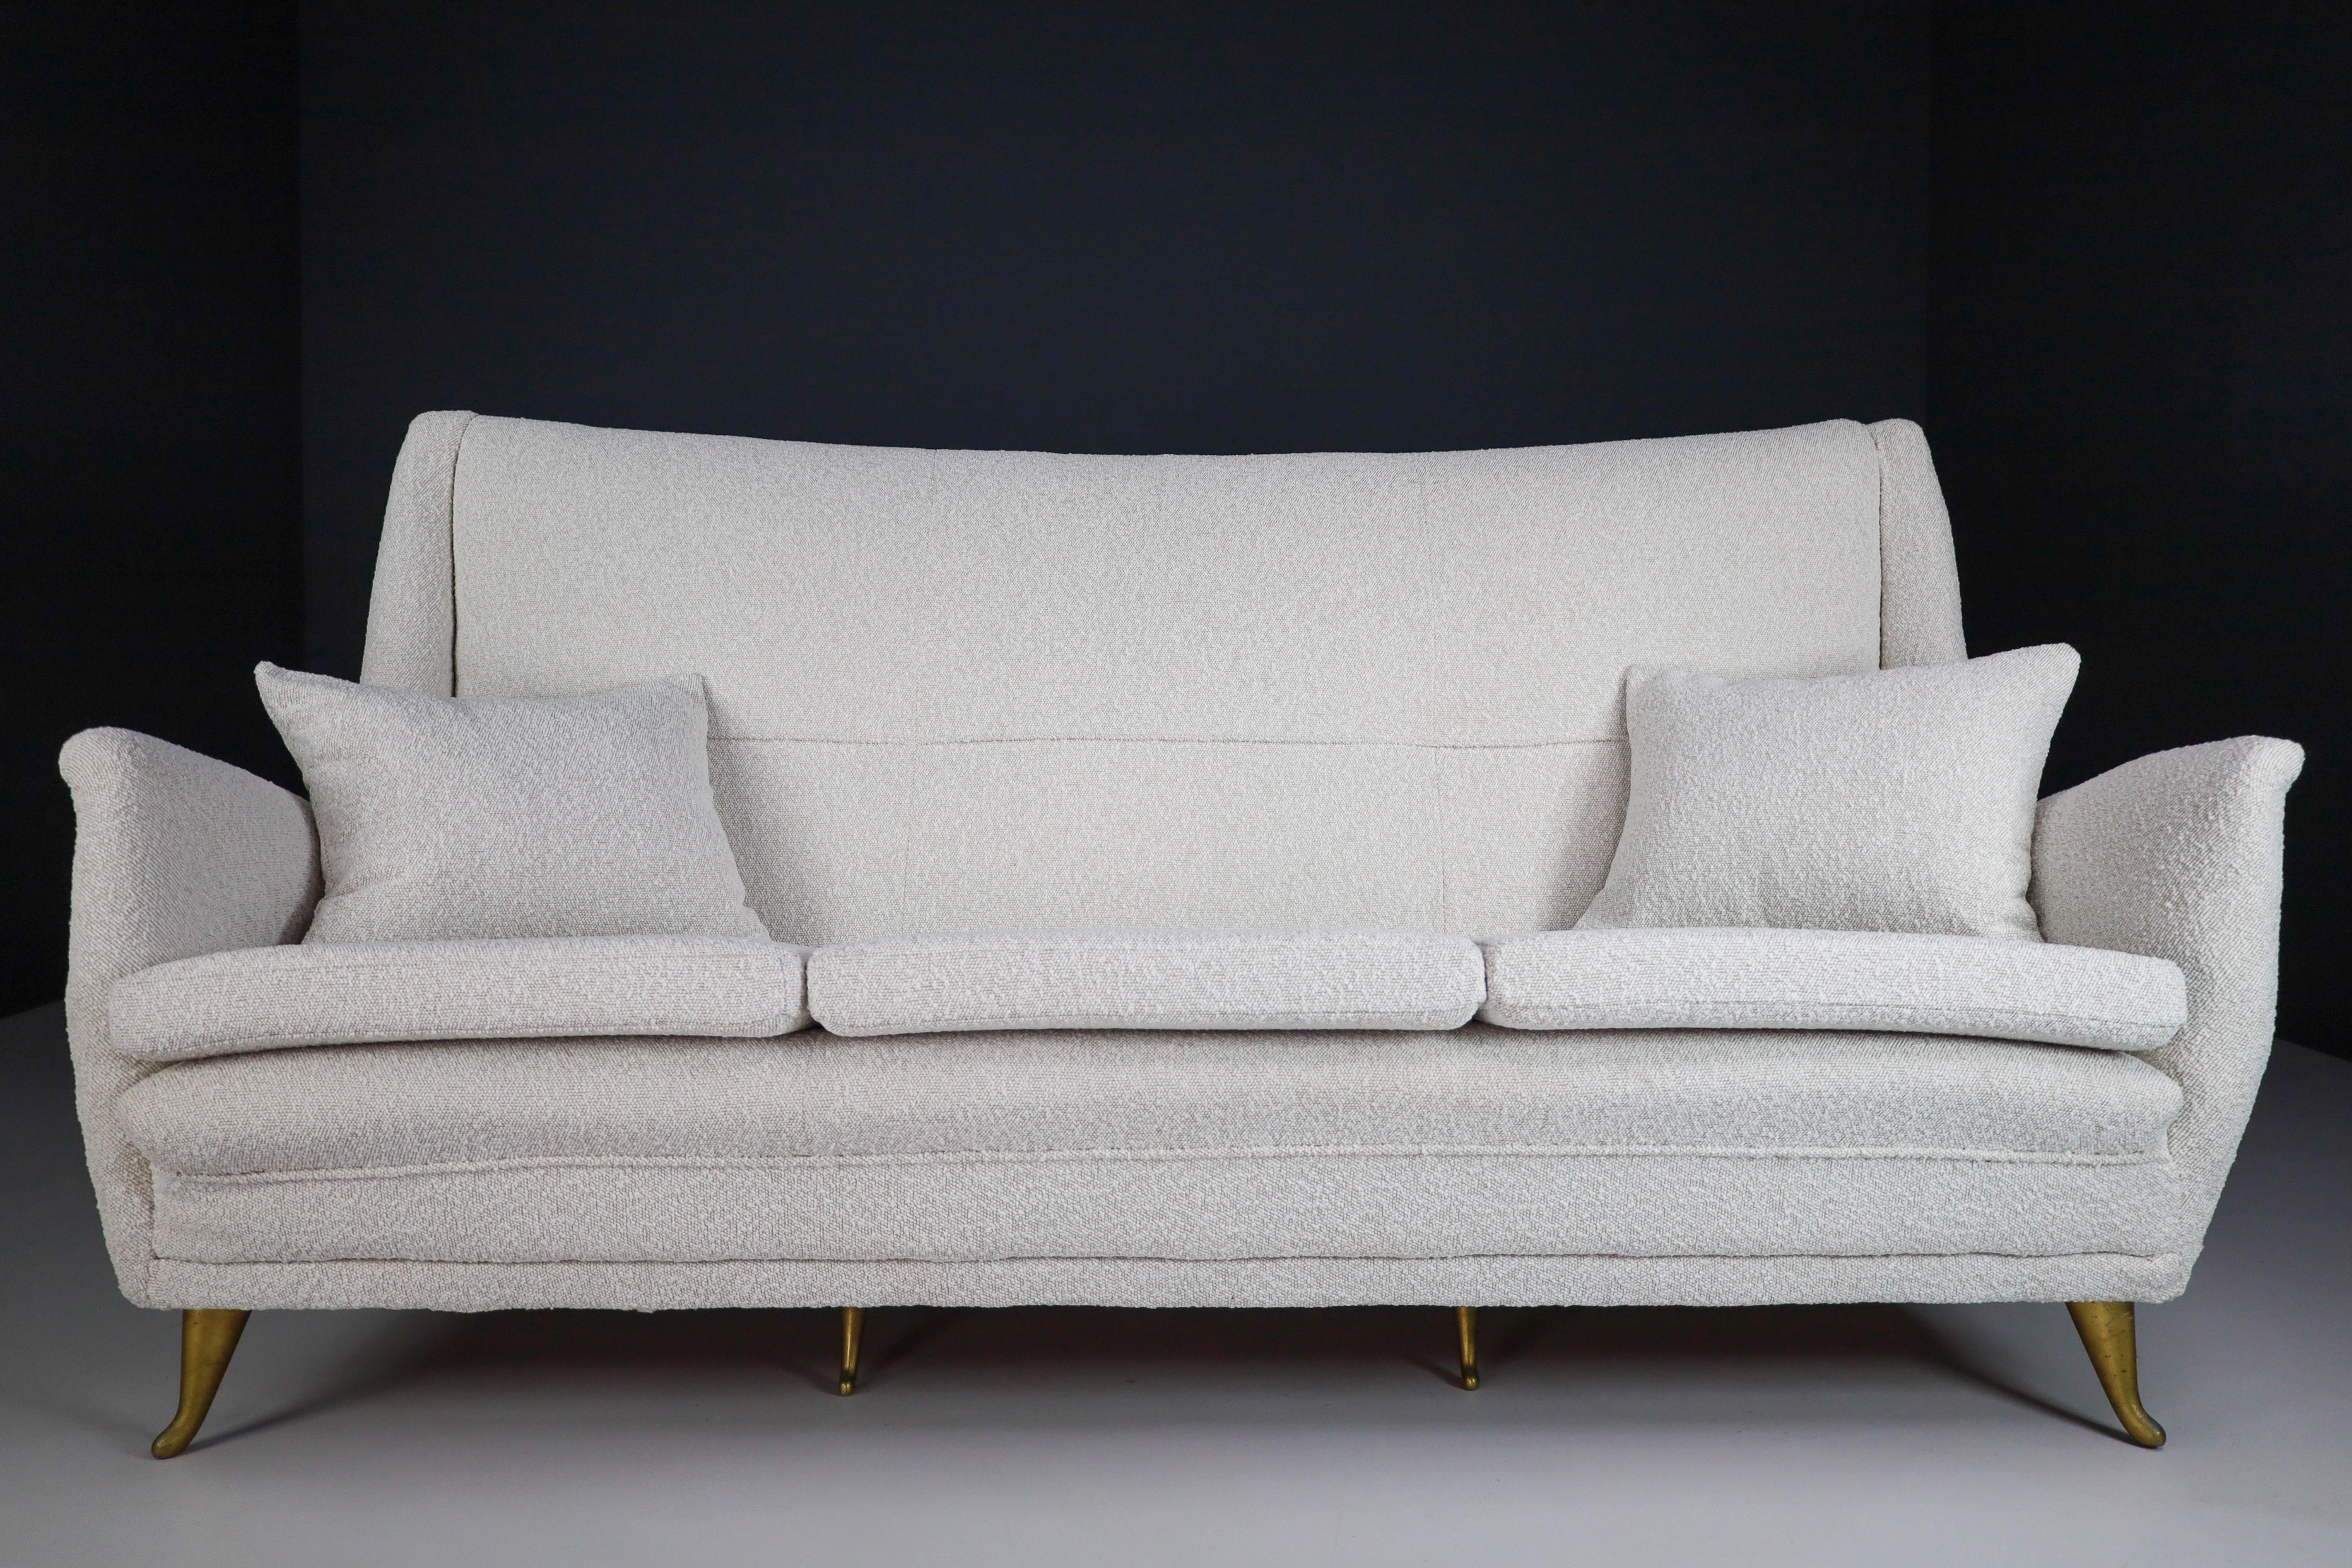 High Back Sofa By Gio Ponti For ISA Bergamo in Bouclé Fabric Upholstery 1950s For Sale 6